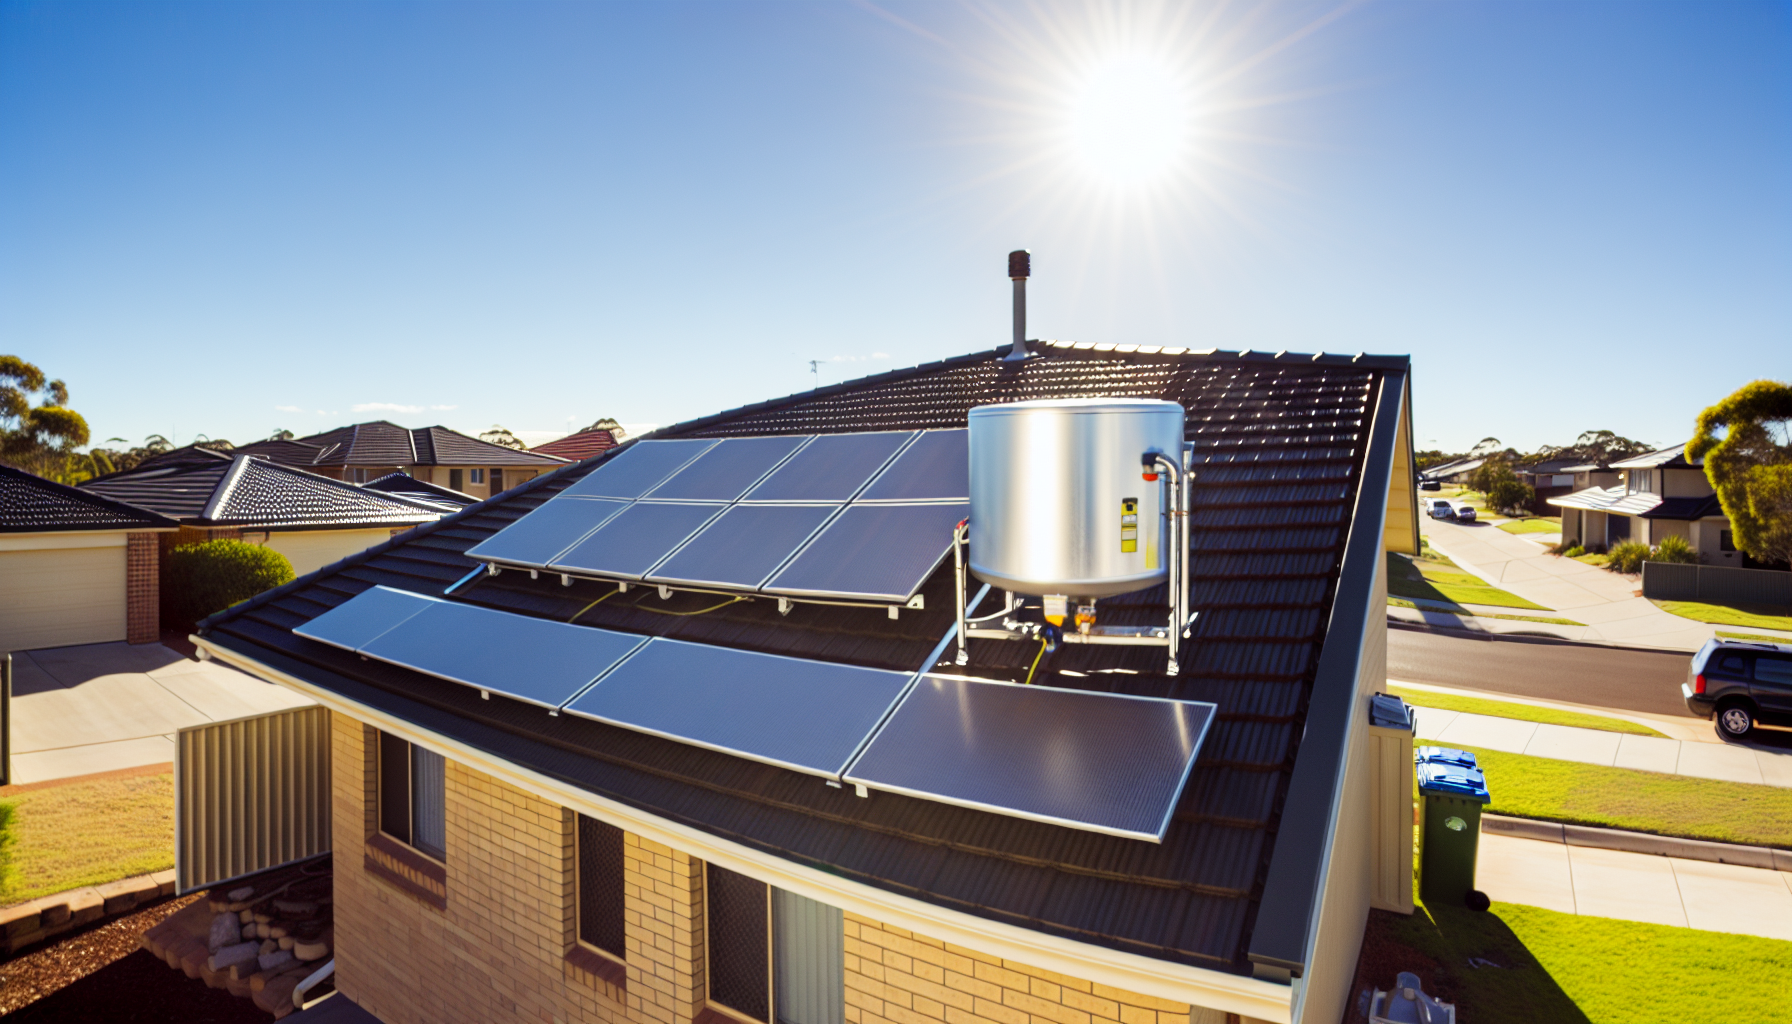 Solar hot water system in a residential setting